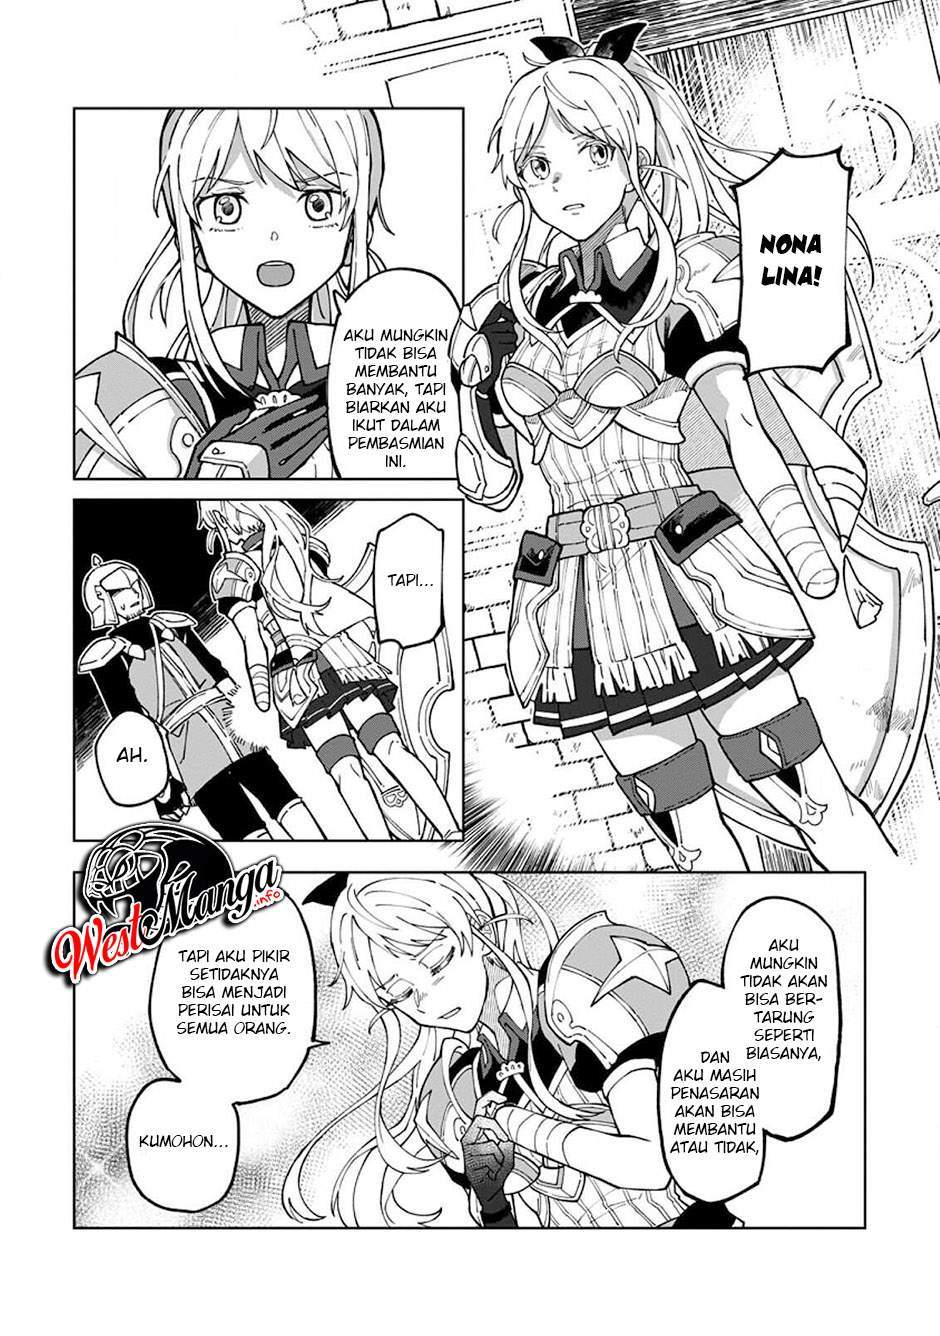 The White Mage Who Was Banished From the Hero’s Party Is Picked up by an S Rank Adventurer ~ This White Mage Is Too Out of the Ordinary! Chapter 06